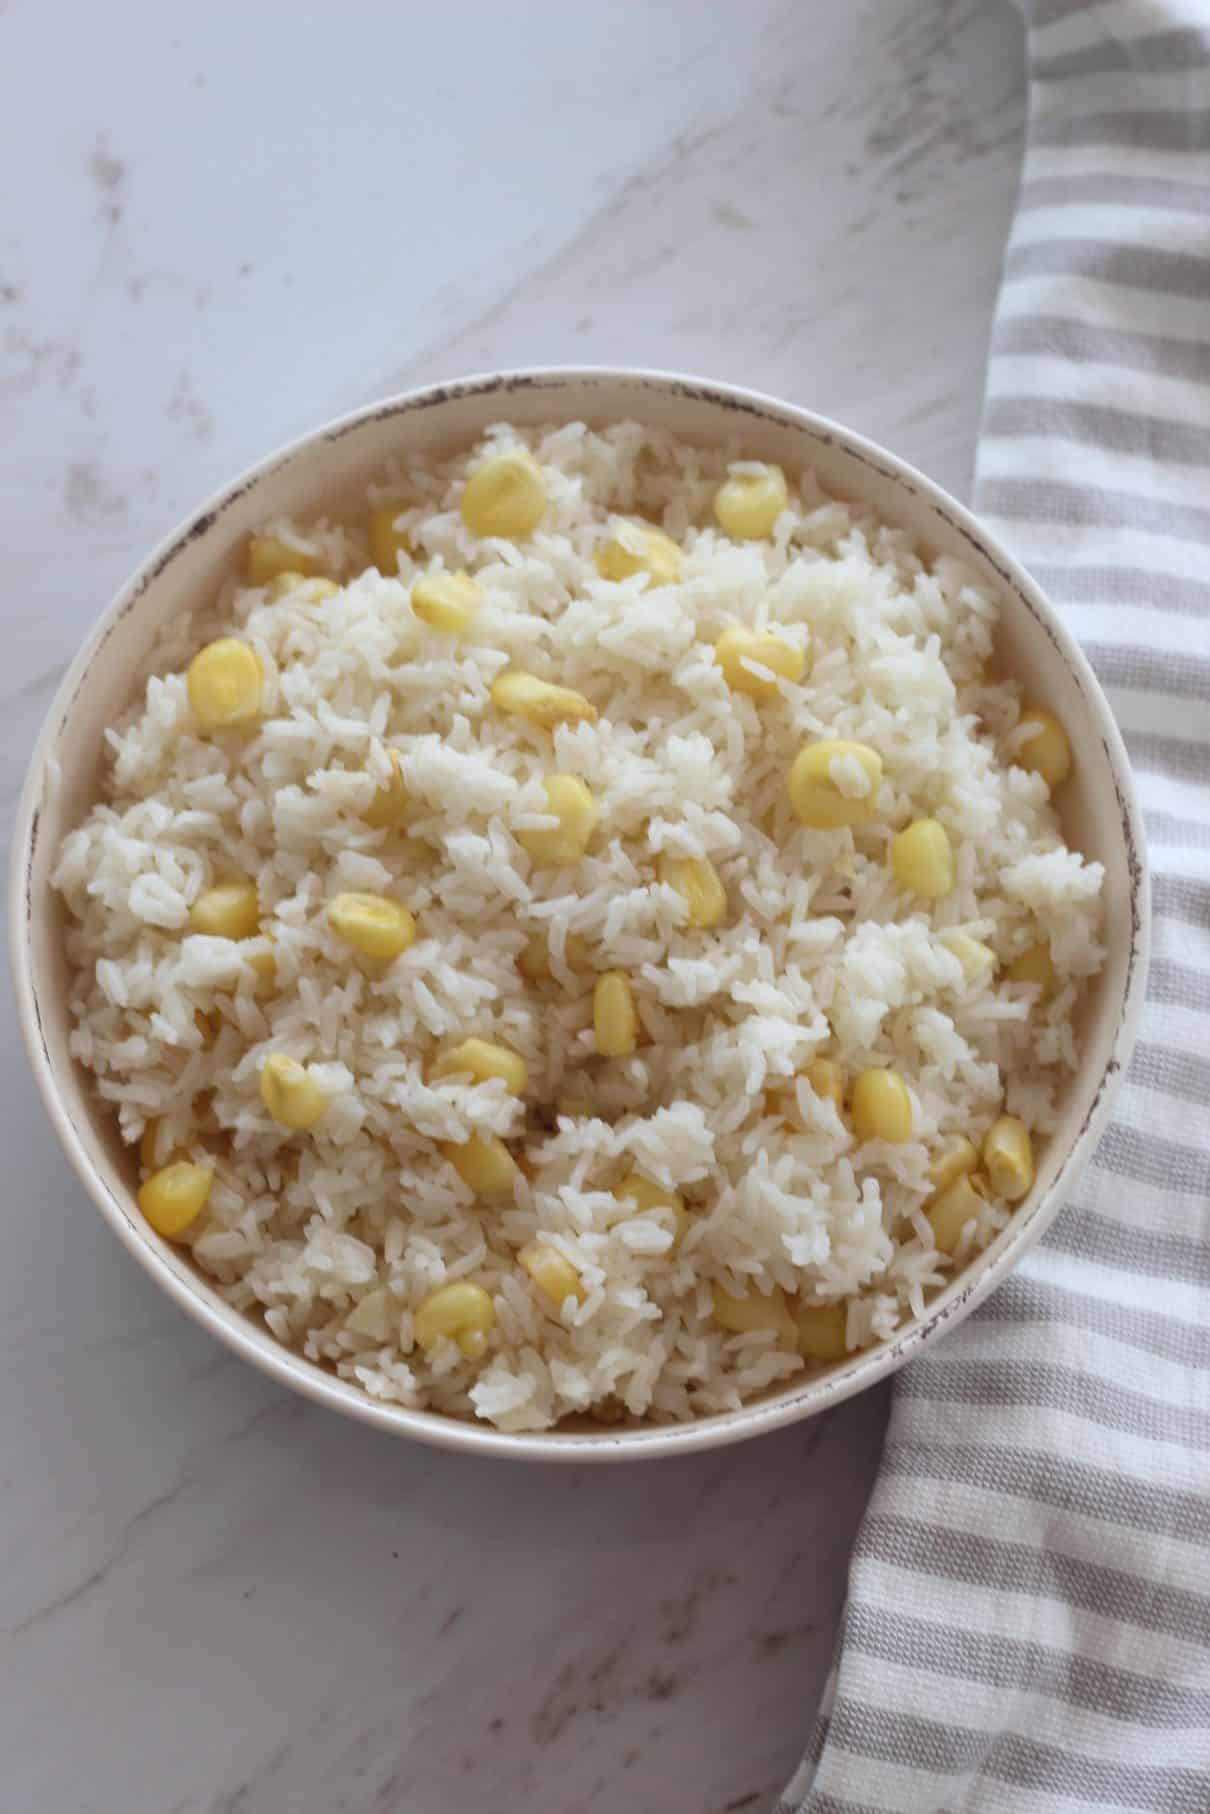 A round dish with fluffy rice and big kernel corn called choclo.